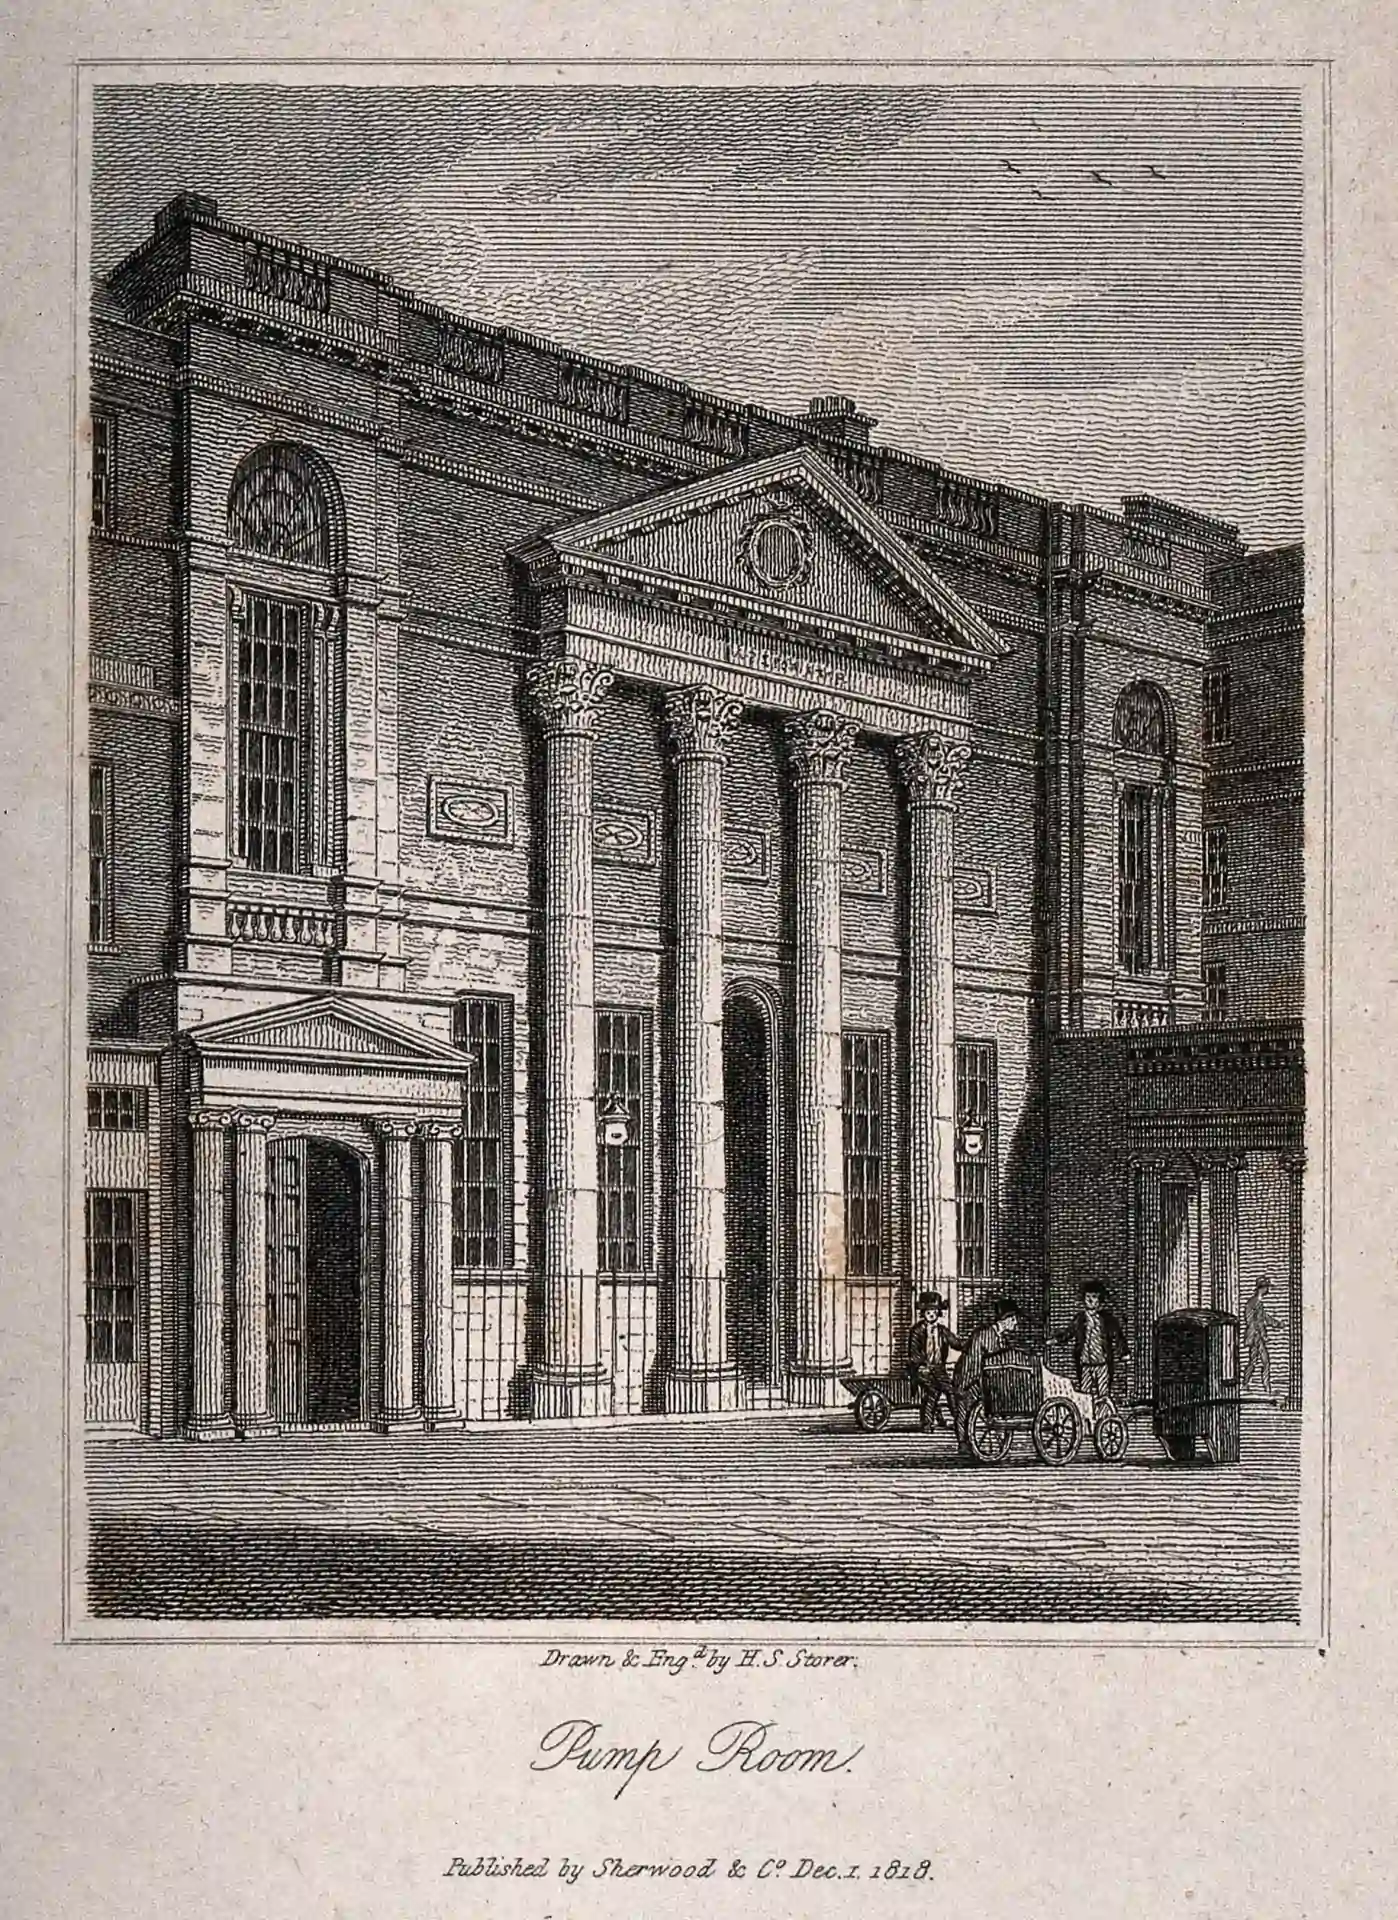 A historical drawing of the pump rooms in Bath in portrait orientation.